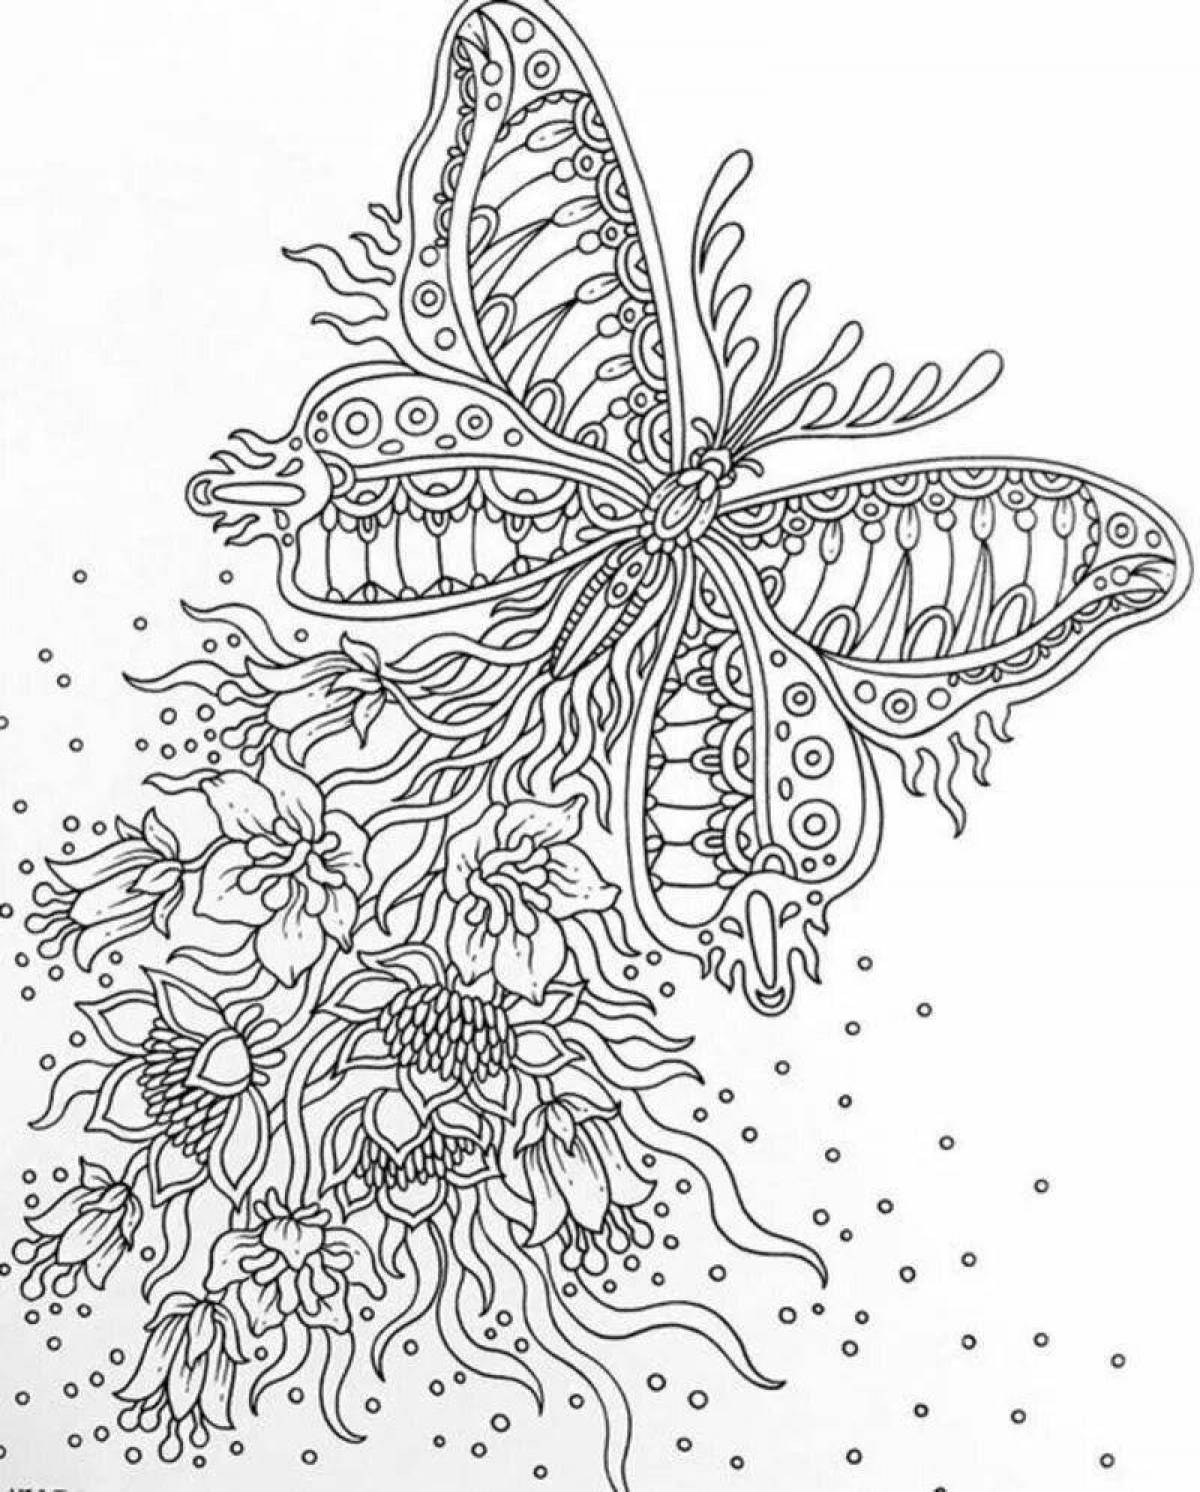 Glorious hanna carlson coloring page